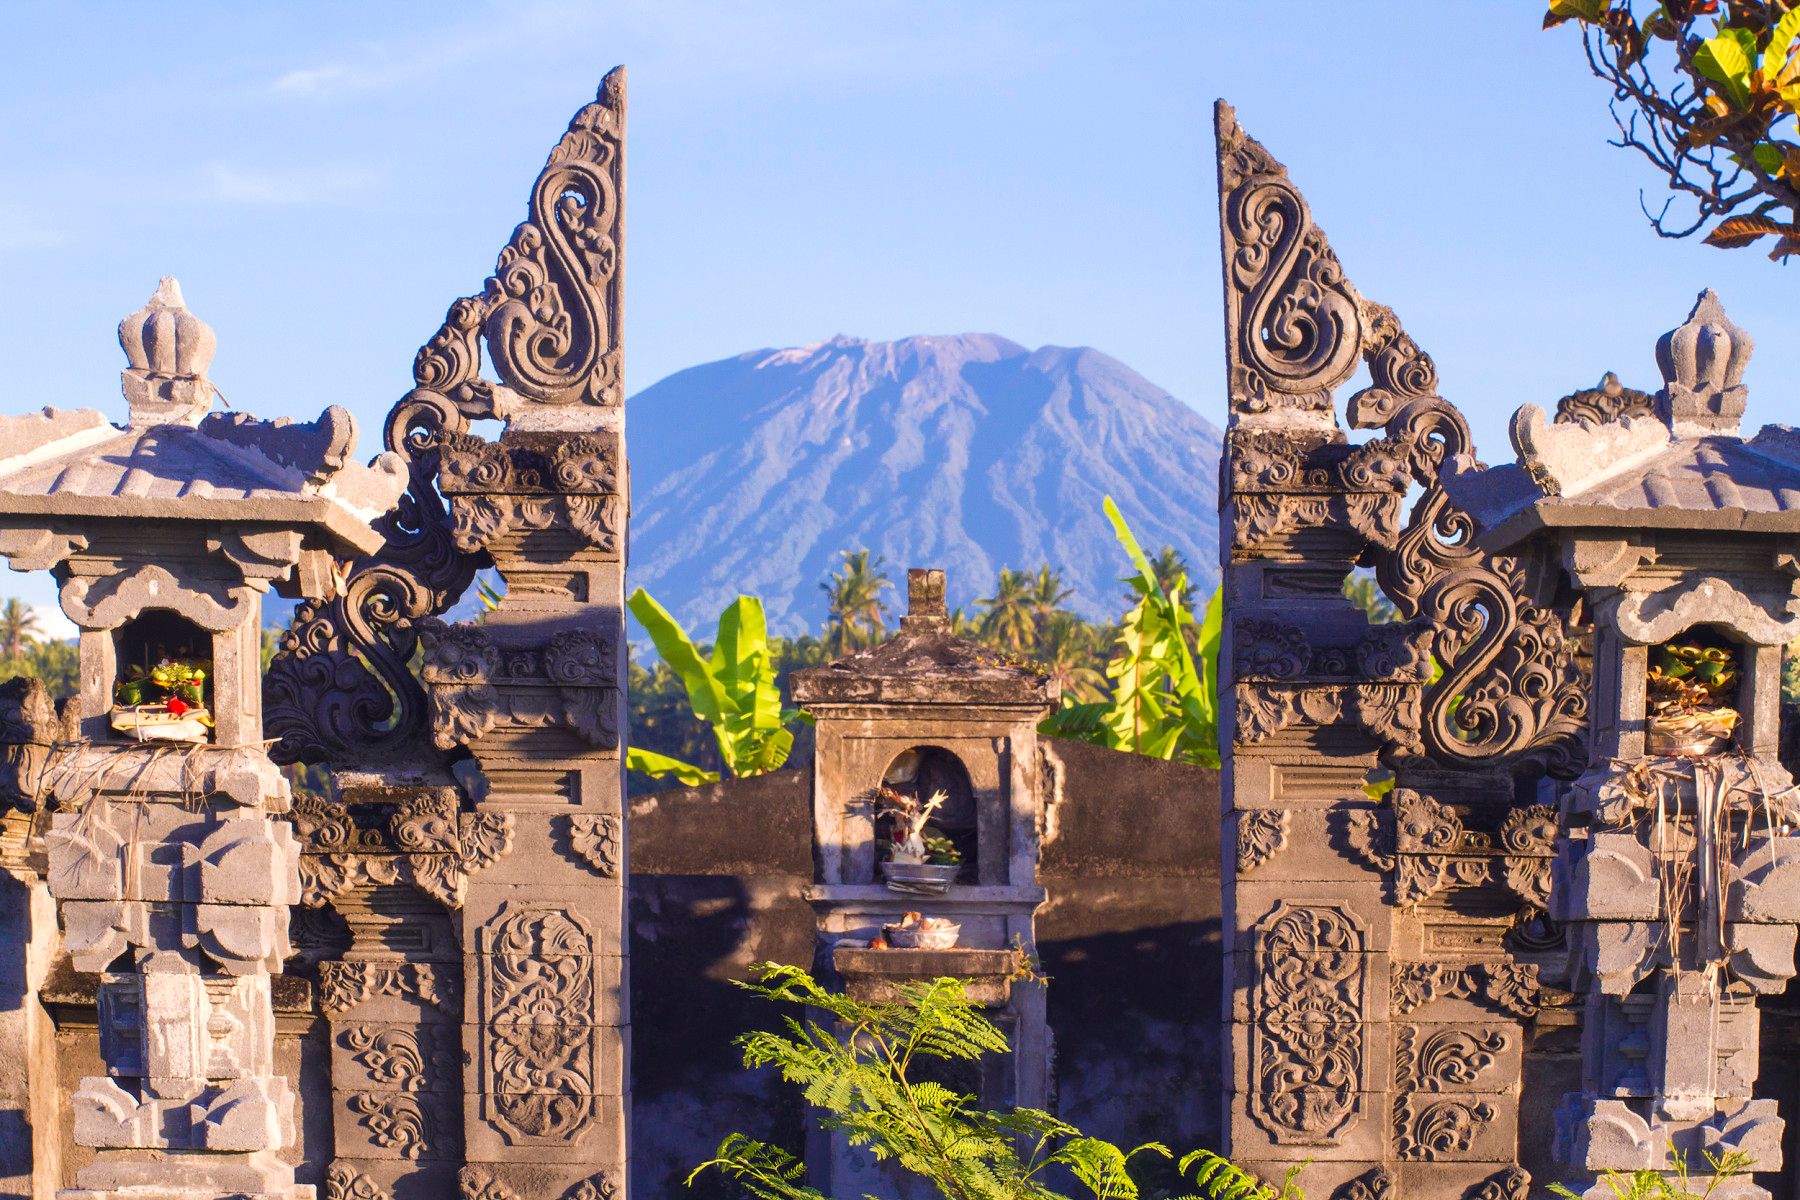 A volcano glimpsed through a temple gate in Indonesia.